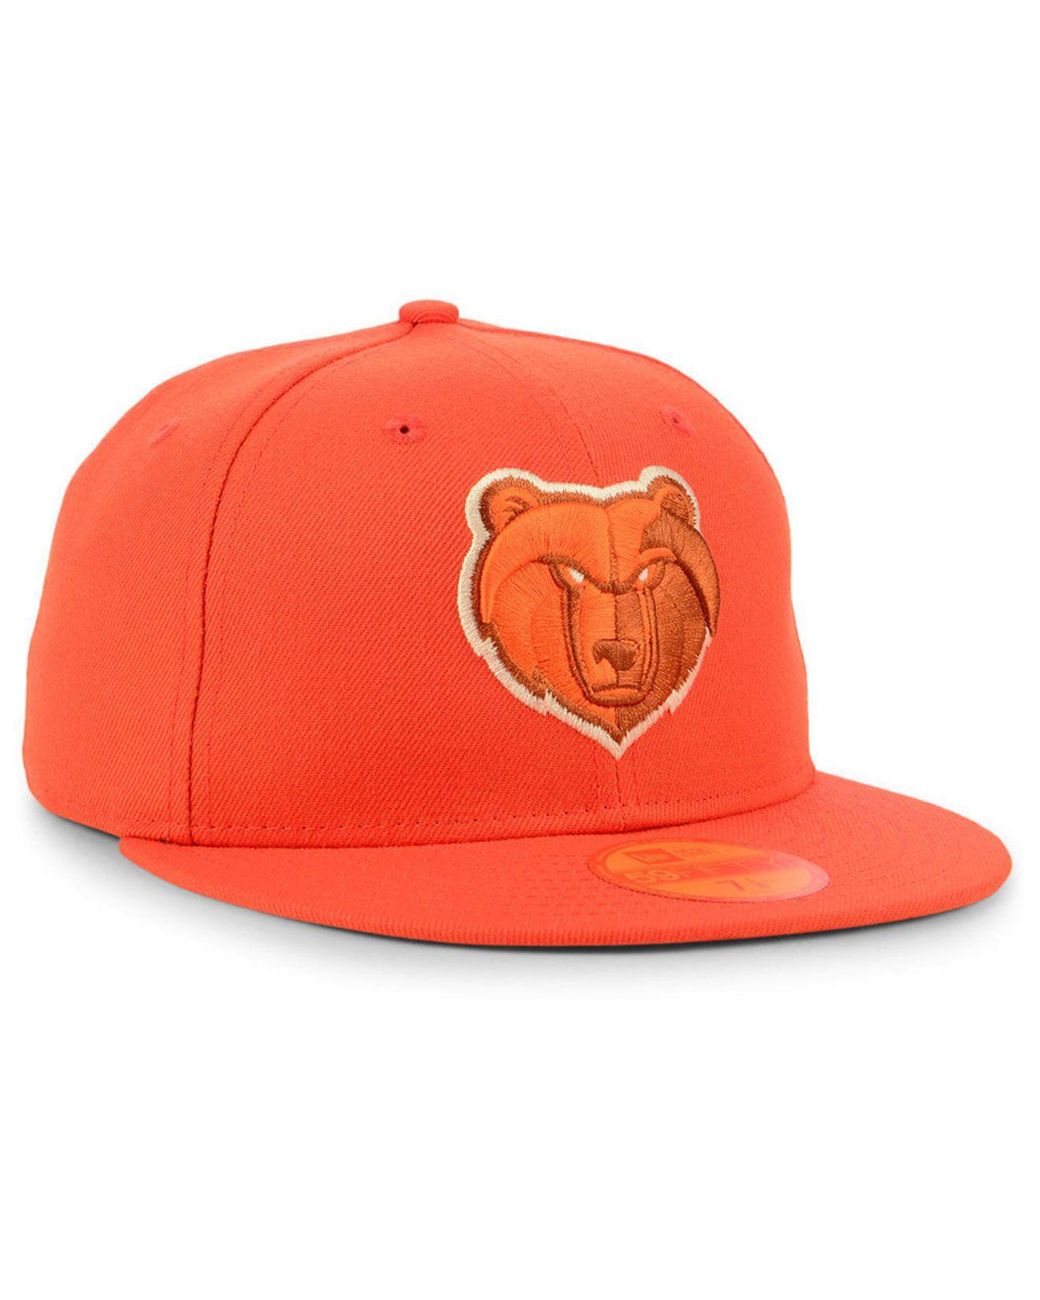 New Era Caps Memphis Grizzlies 59FIFTY Fitted Hat Red/Black